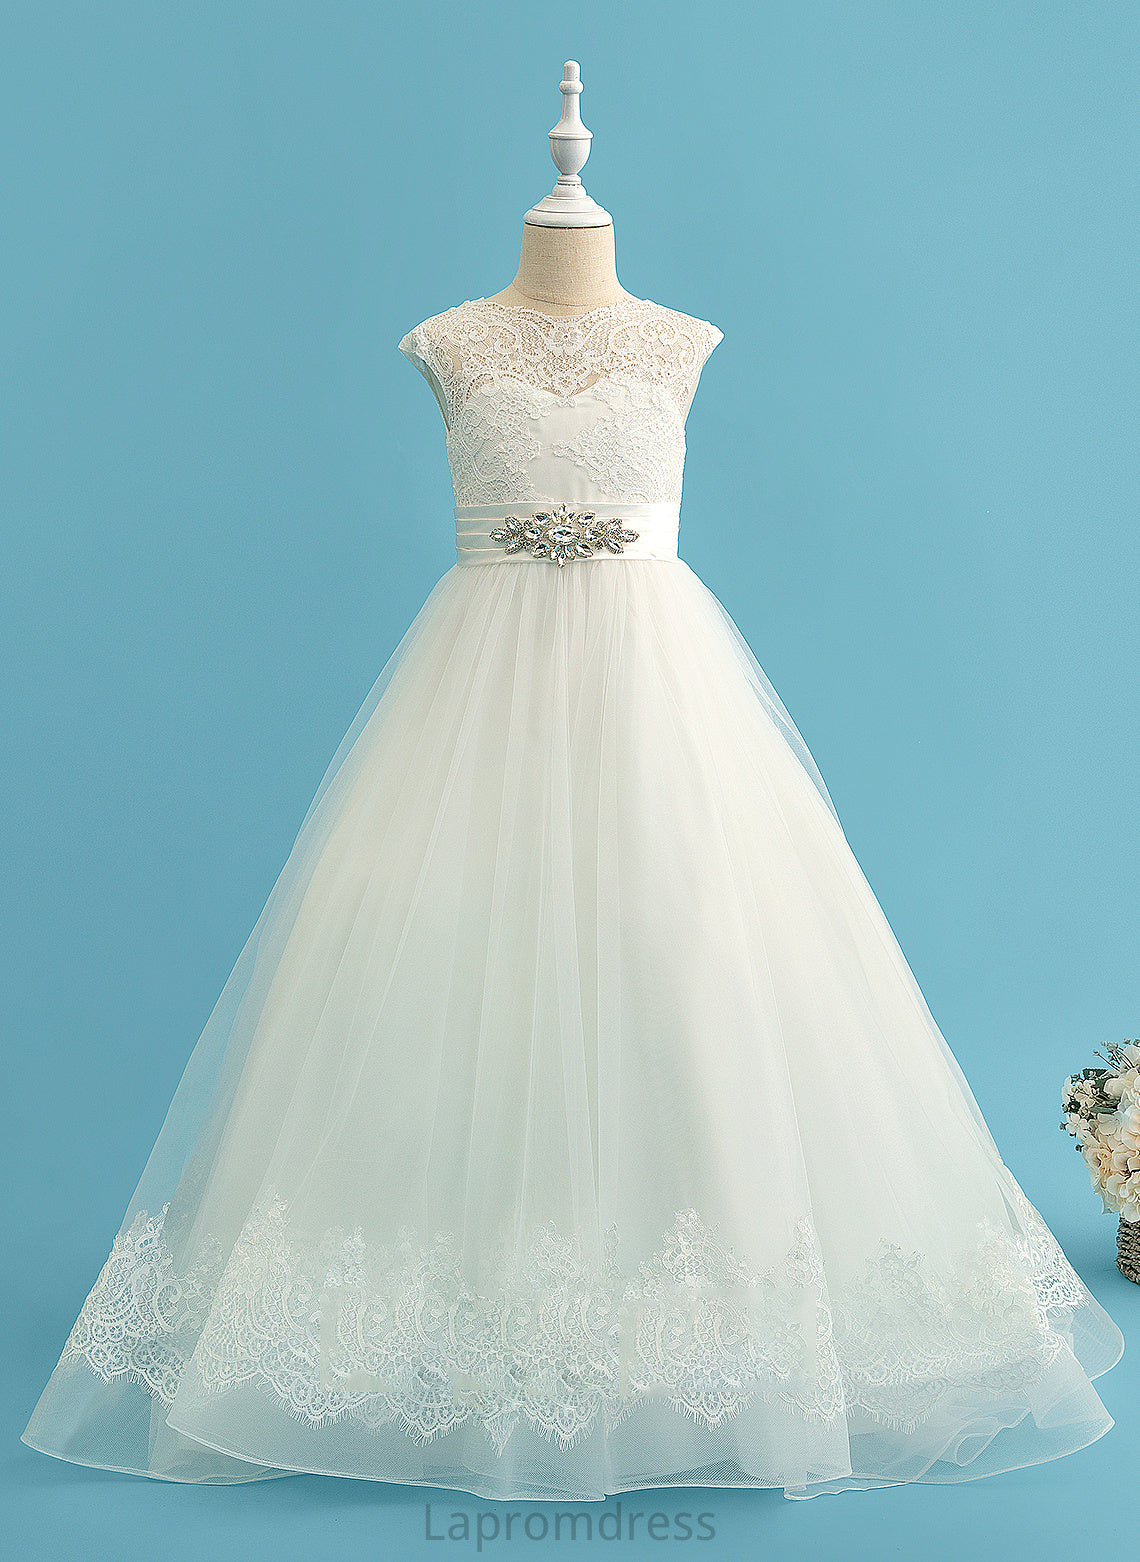 Flower Beading Dress With Train Neck Sweep - Girl Scoop Sleeveless Flower Girl Dresses Louisa Satin/Tulle/Lace Ball-Gown/Princess